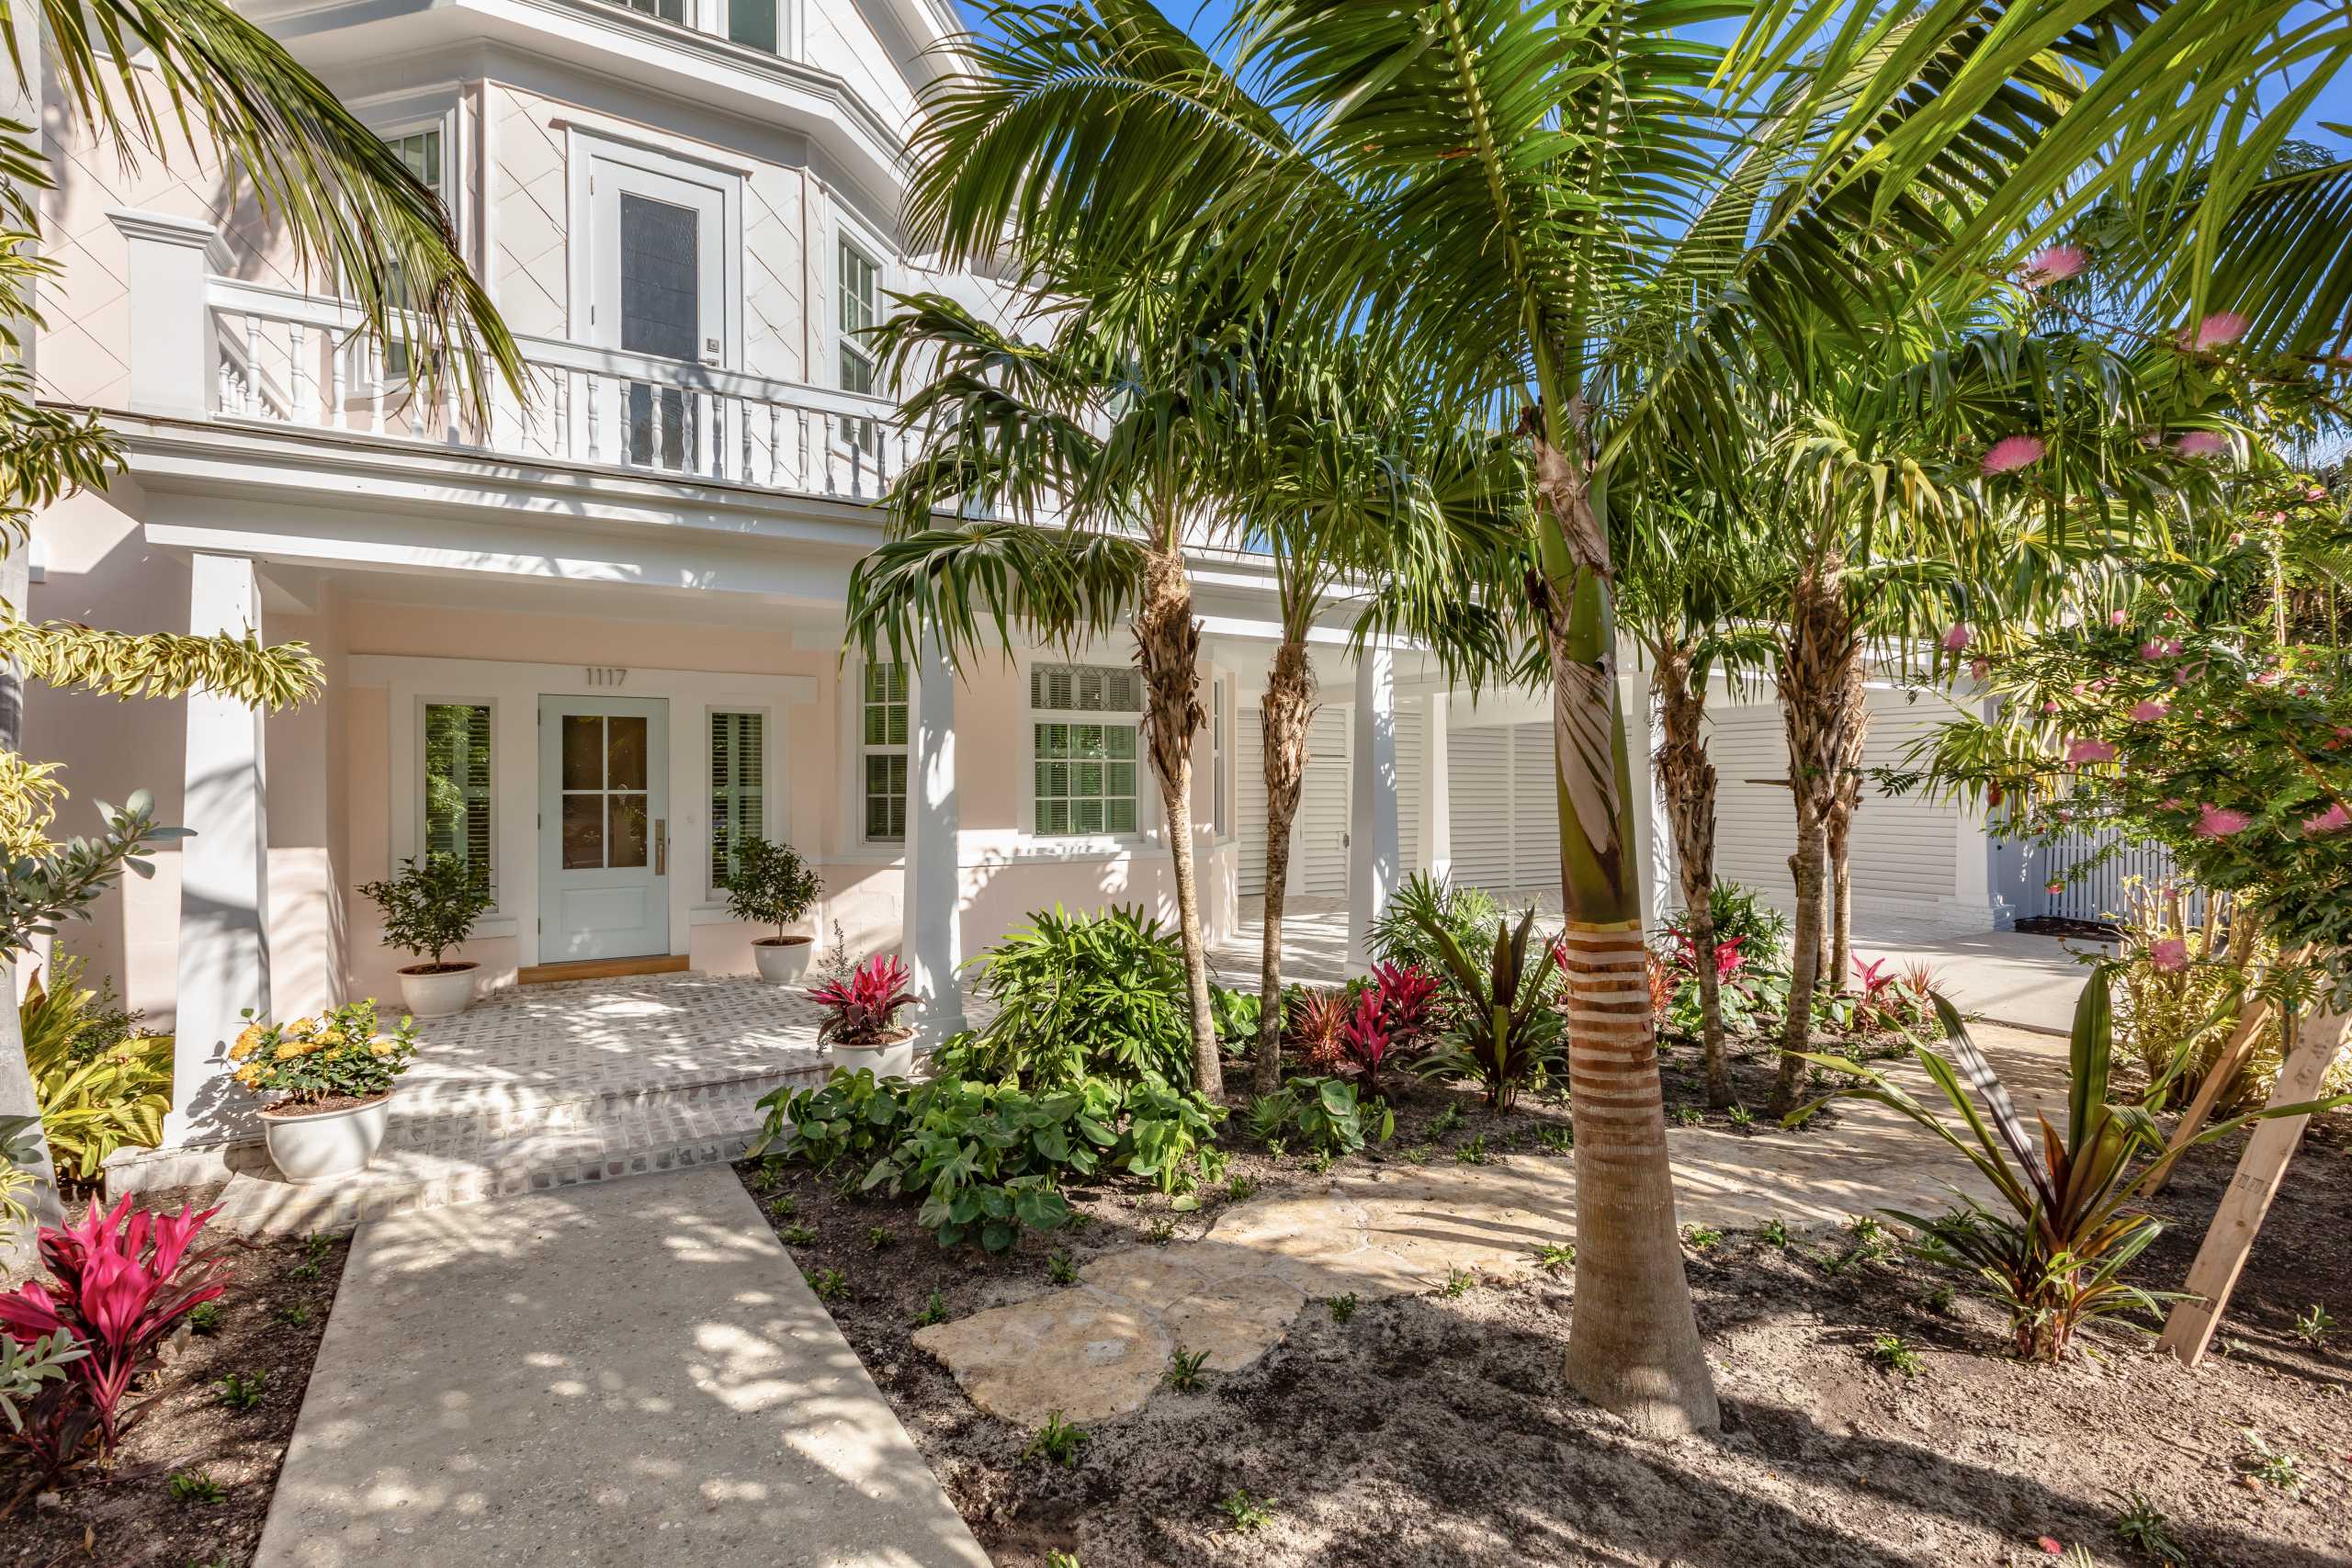 The Best in Key West - 1117 Flagler Ave. - New Lower Price $5,090,000